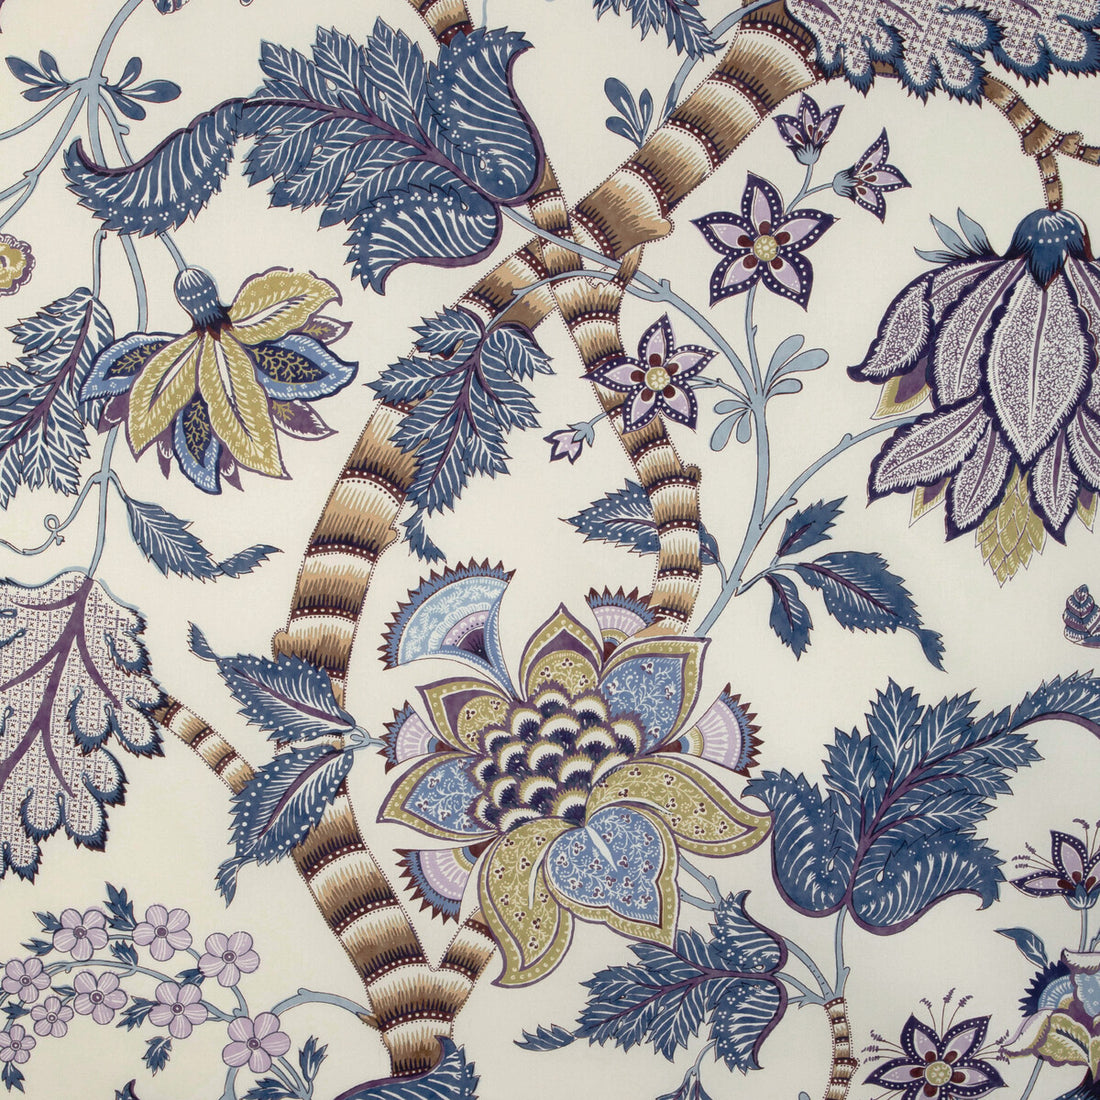 Cadenet Print fabric in blue/gold color - pattern 8023105.54.0 - by Brunschwig &amp; Fils in the Cadenet collection